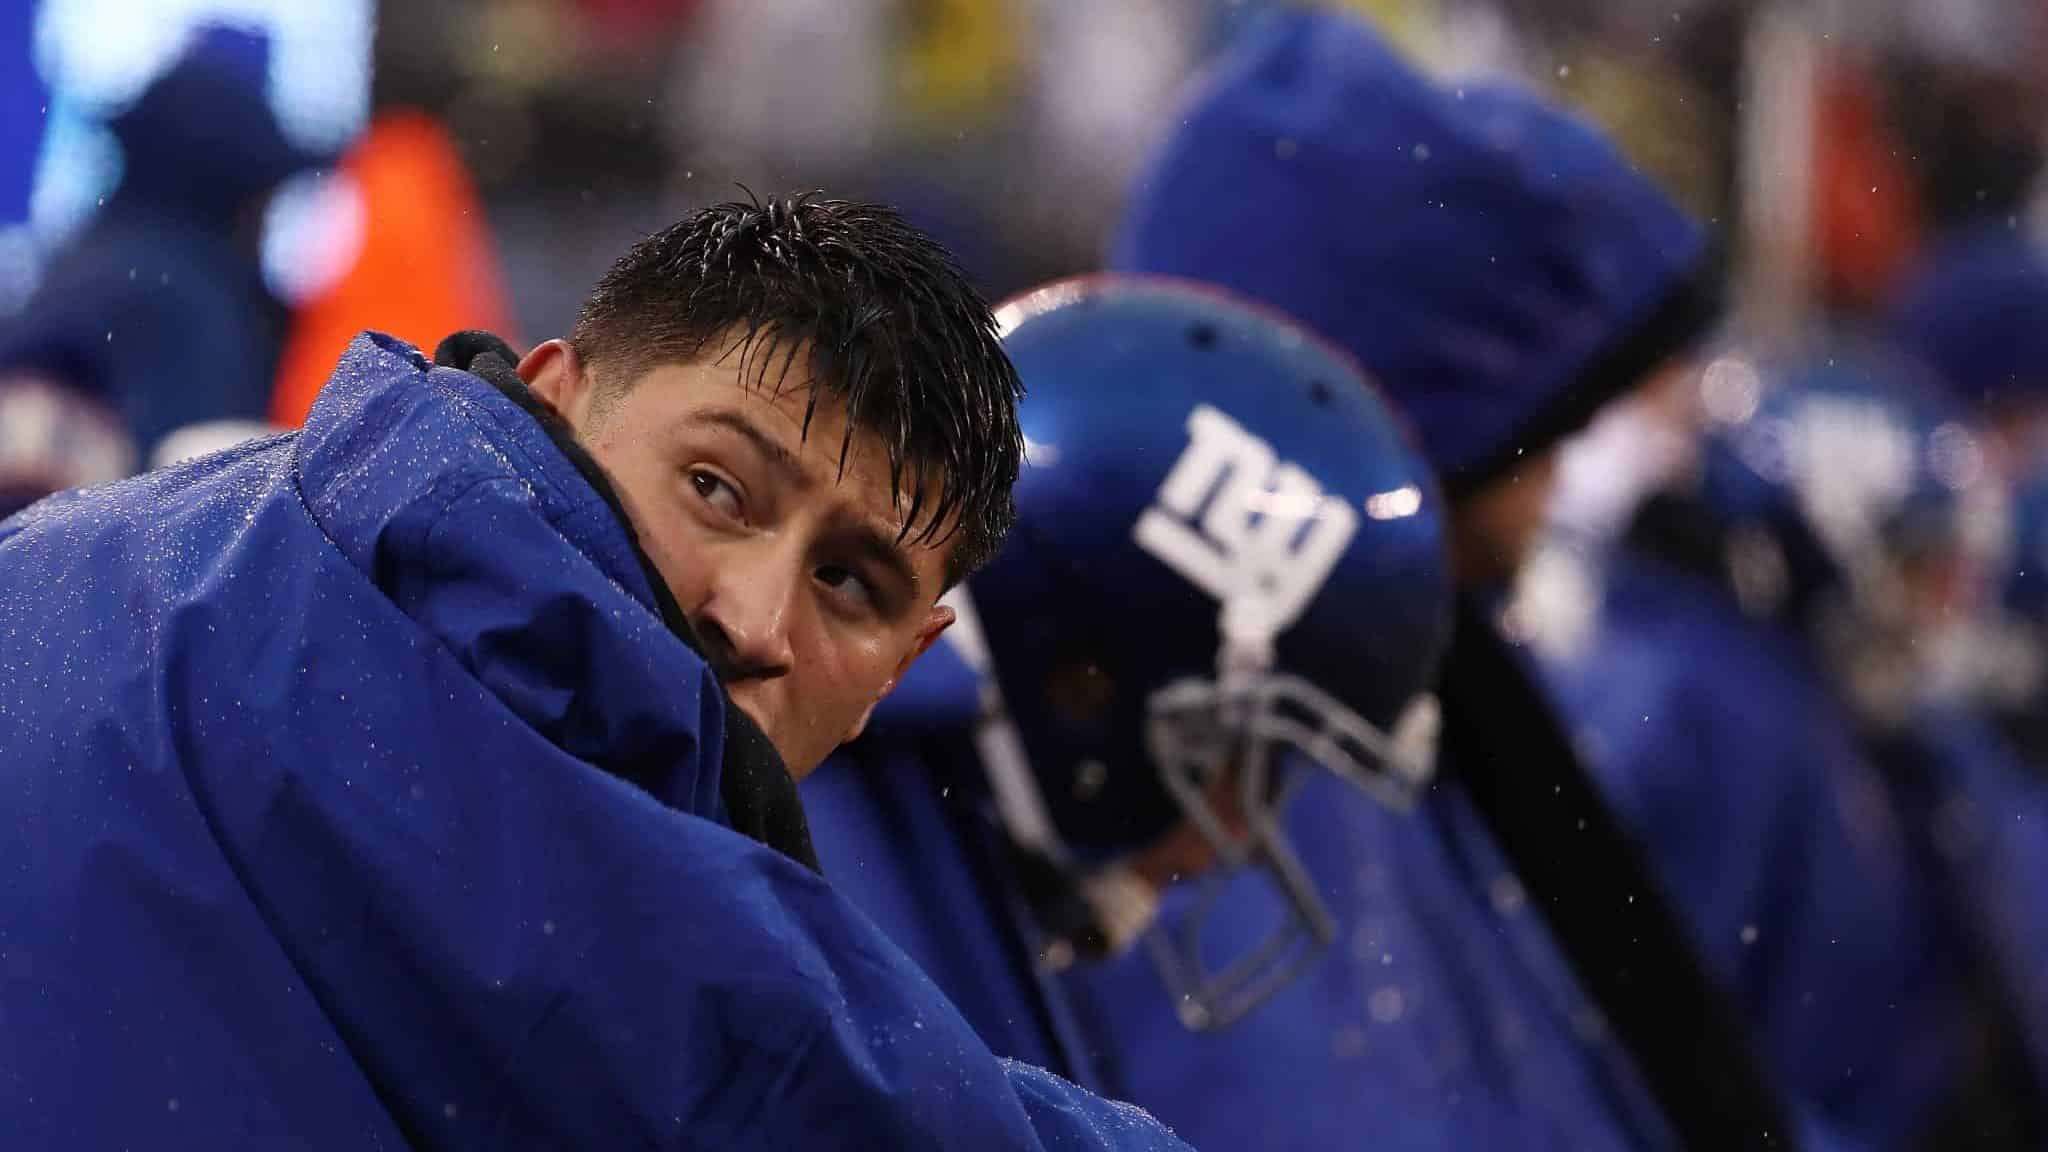 EAST RUTHERFORD, NEW JERSEY - DECEMBER 16: Aldrick Rosas #2 of the New York Giants looks on against the Tennessee Titans during their game at MetLife Stadium on December 16, 2018 in East Rutherford, New Jersey.